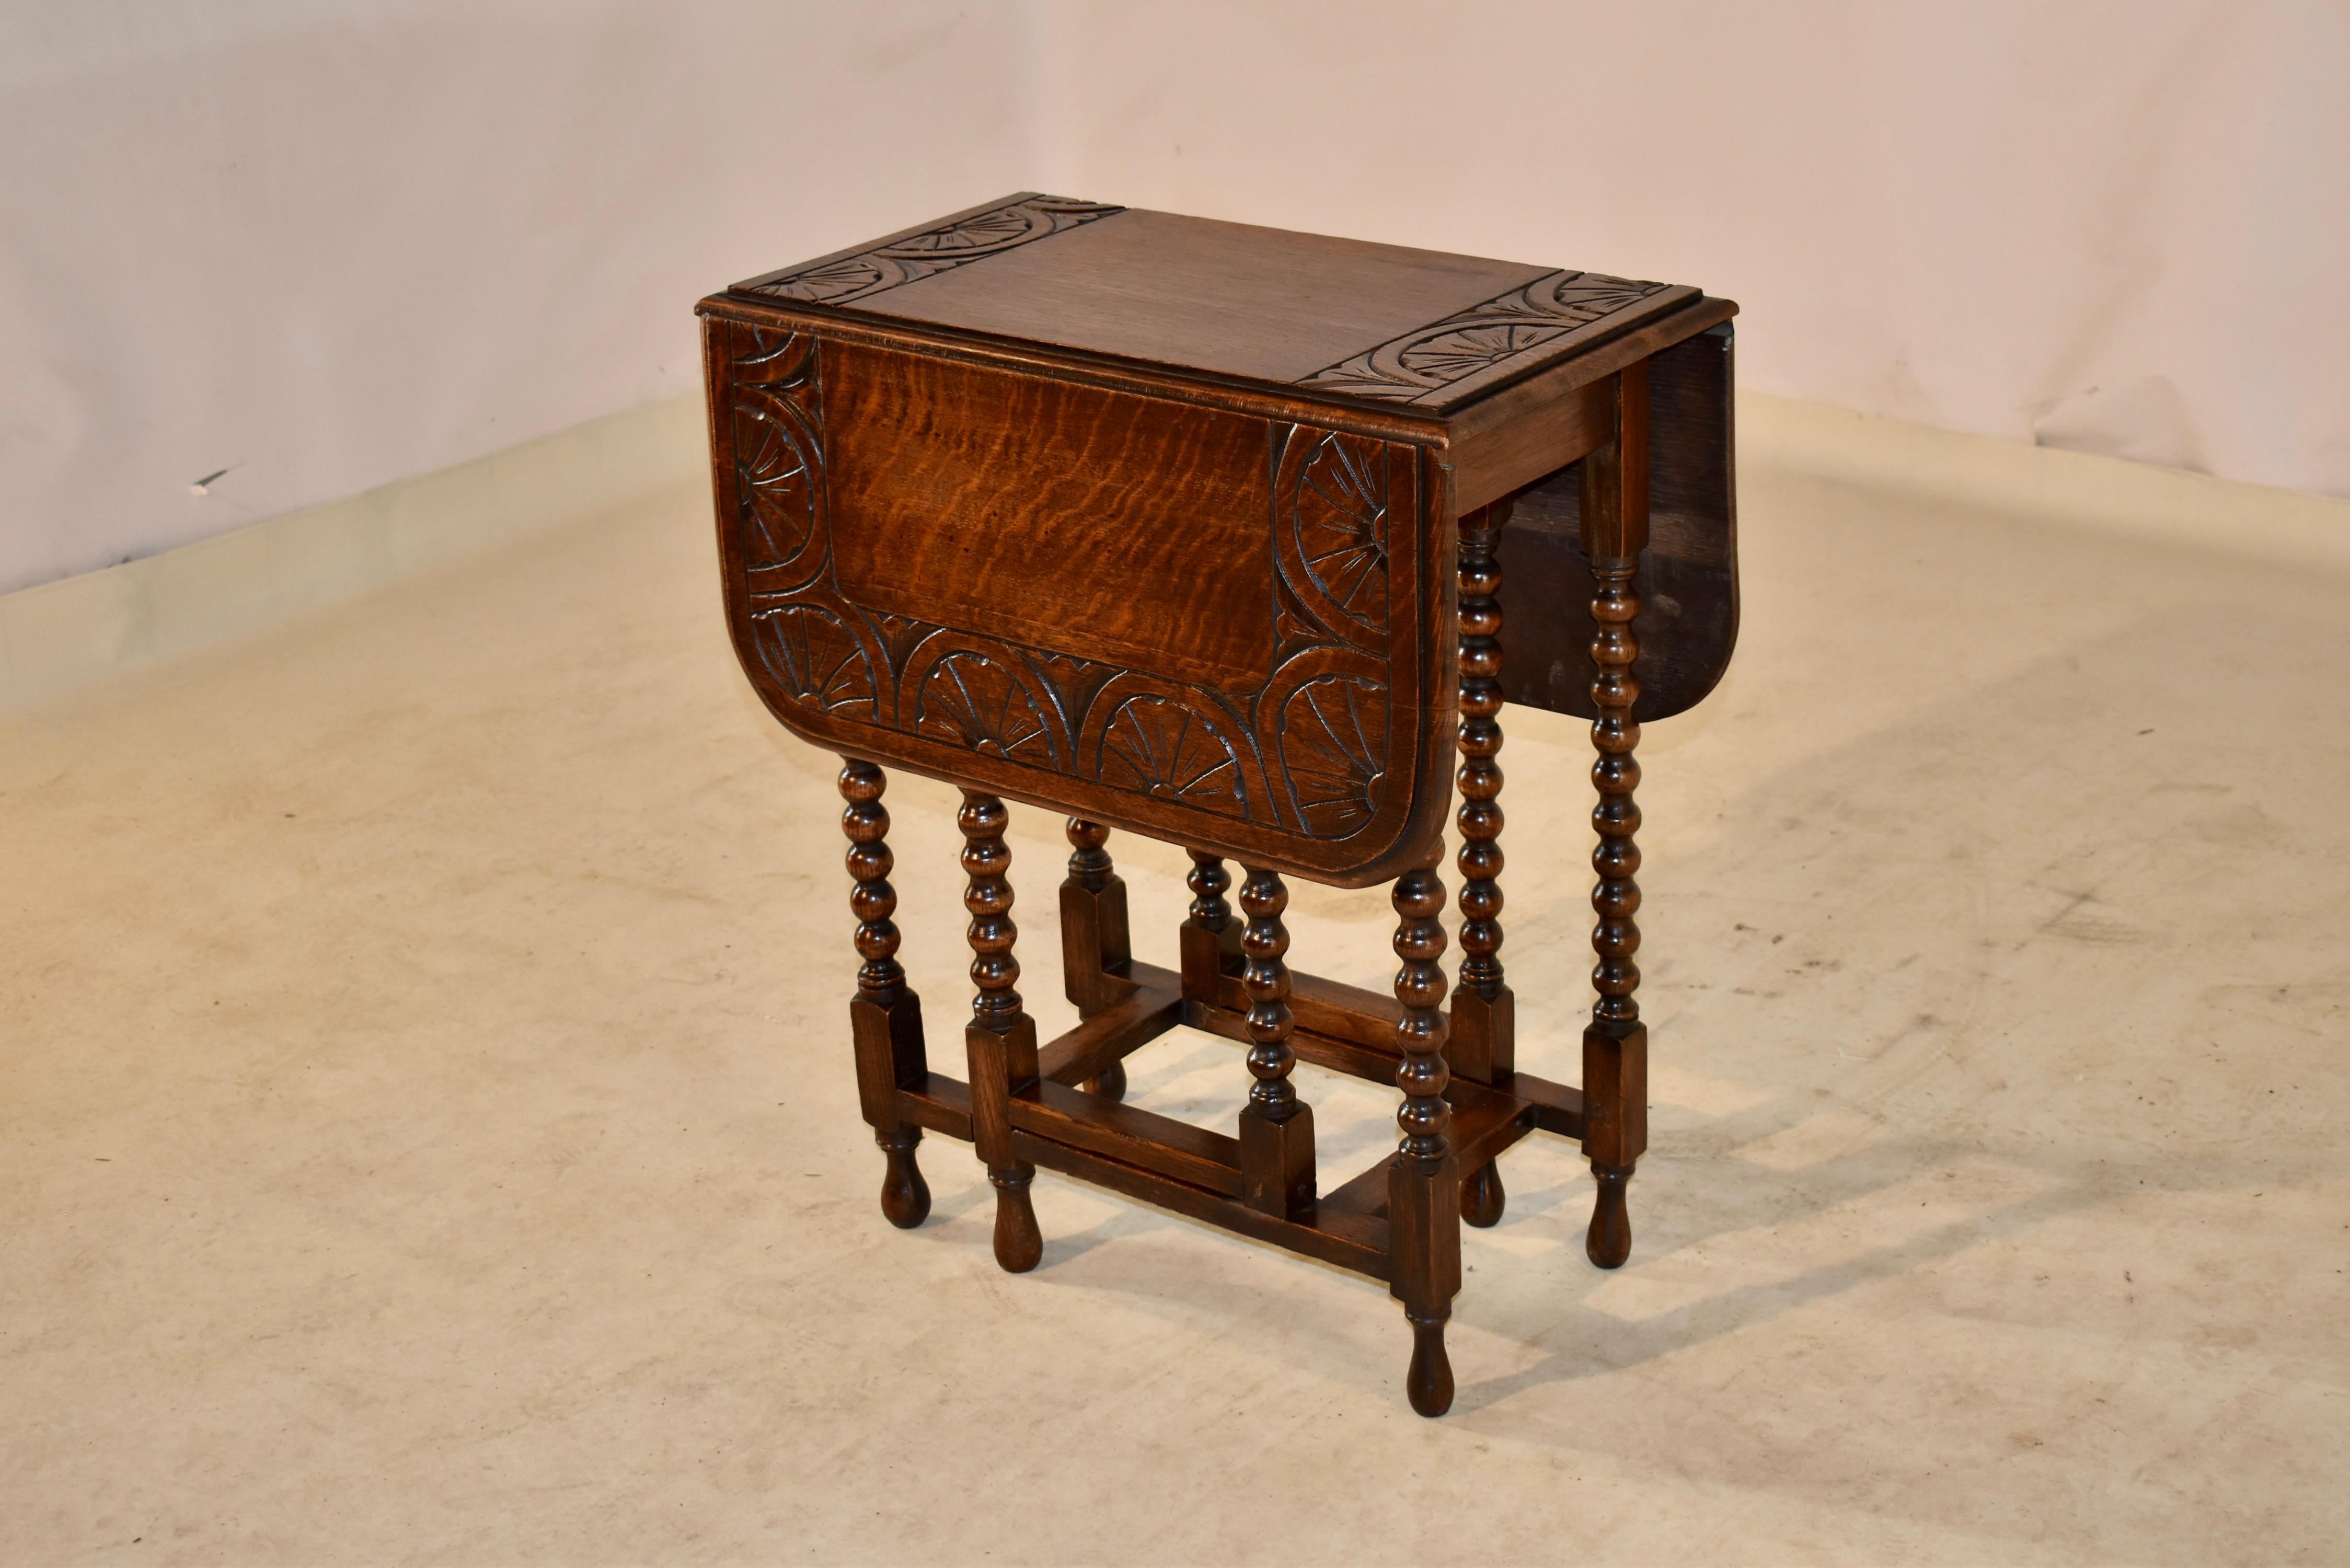 Hand-Carved 19th Century English Gate Leg Table